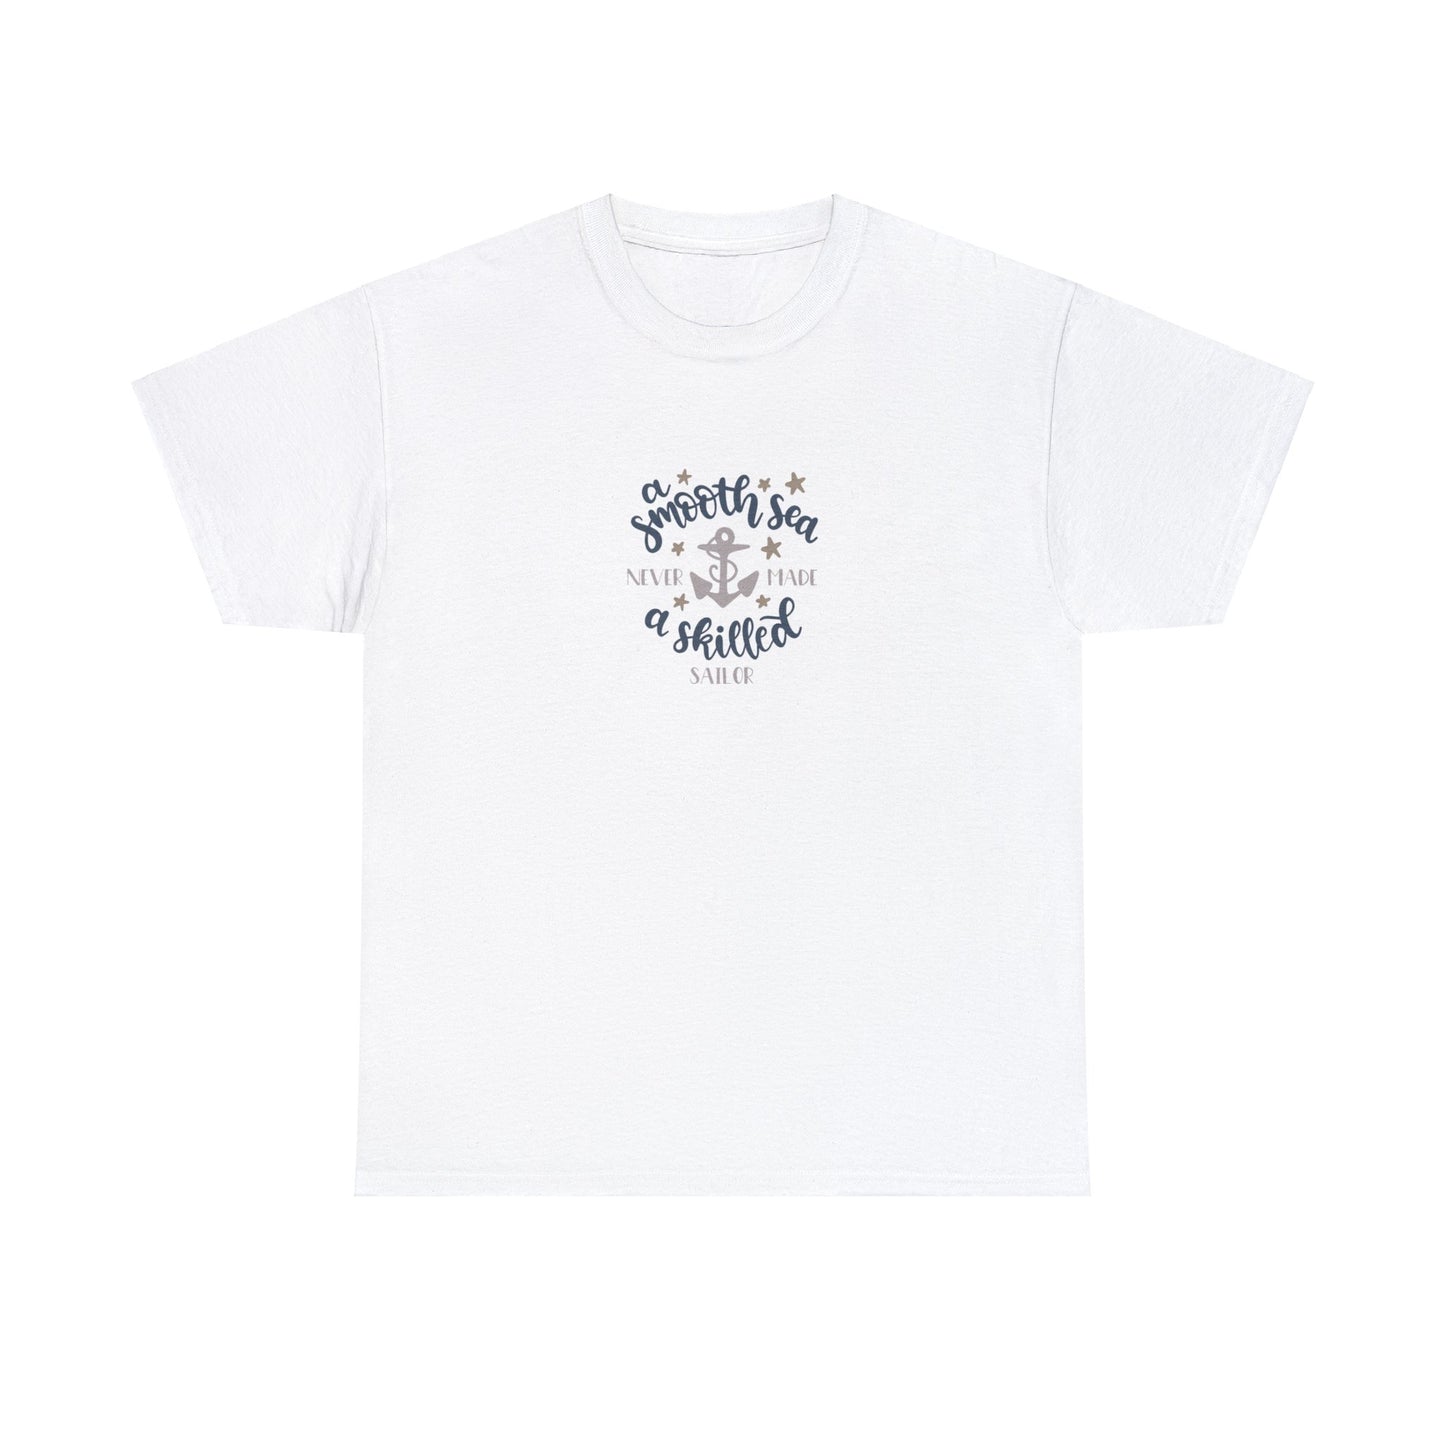 A Smooth Sea Never Made a Skilled Sailor T-Shirt